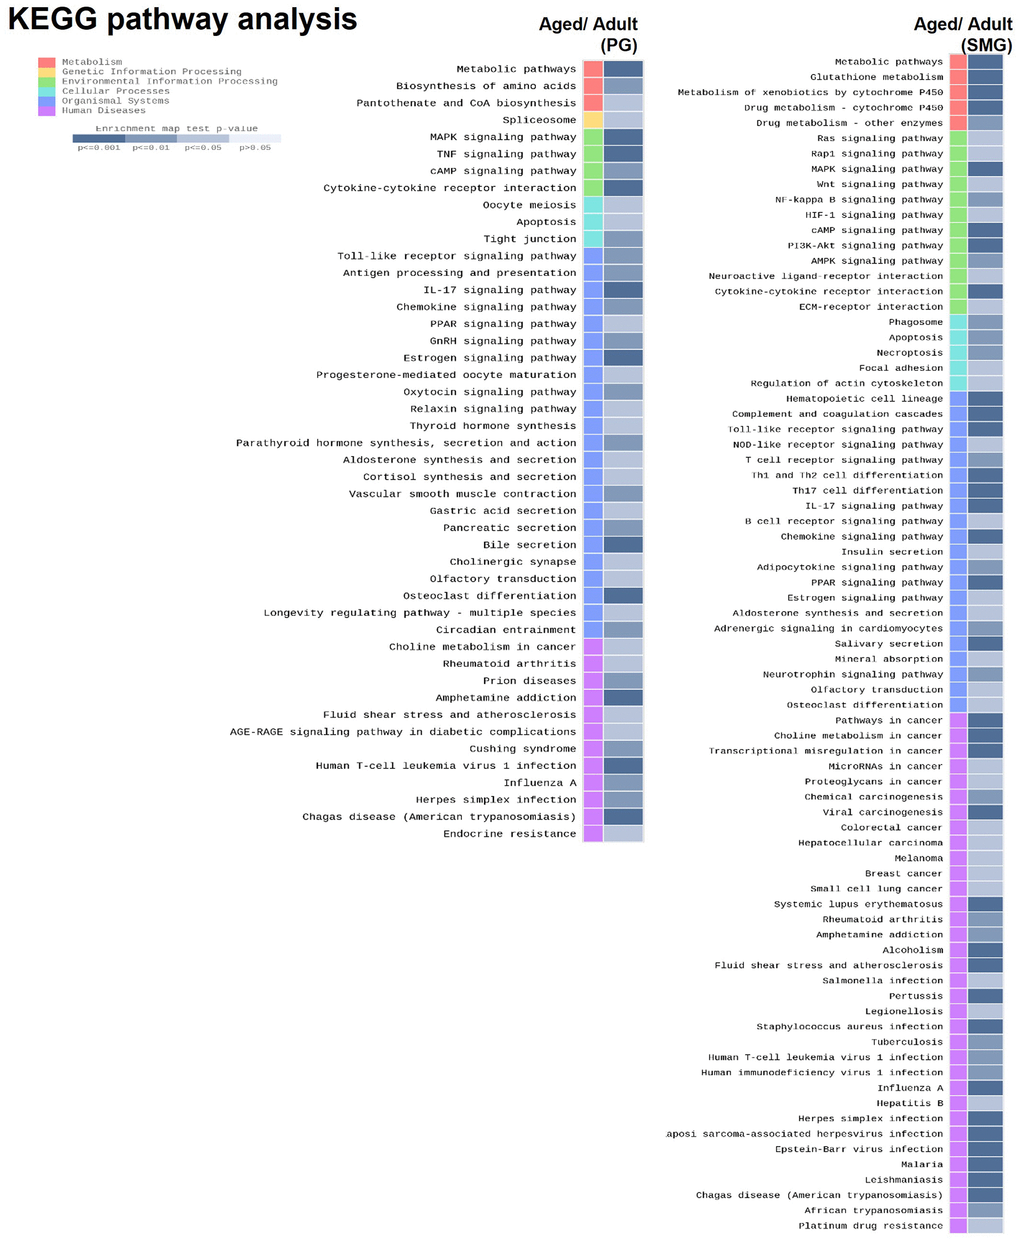 KEGG pathway analysis of DEGs derived from comparison of adult and aged salivary glands.